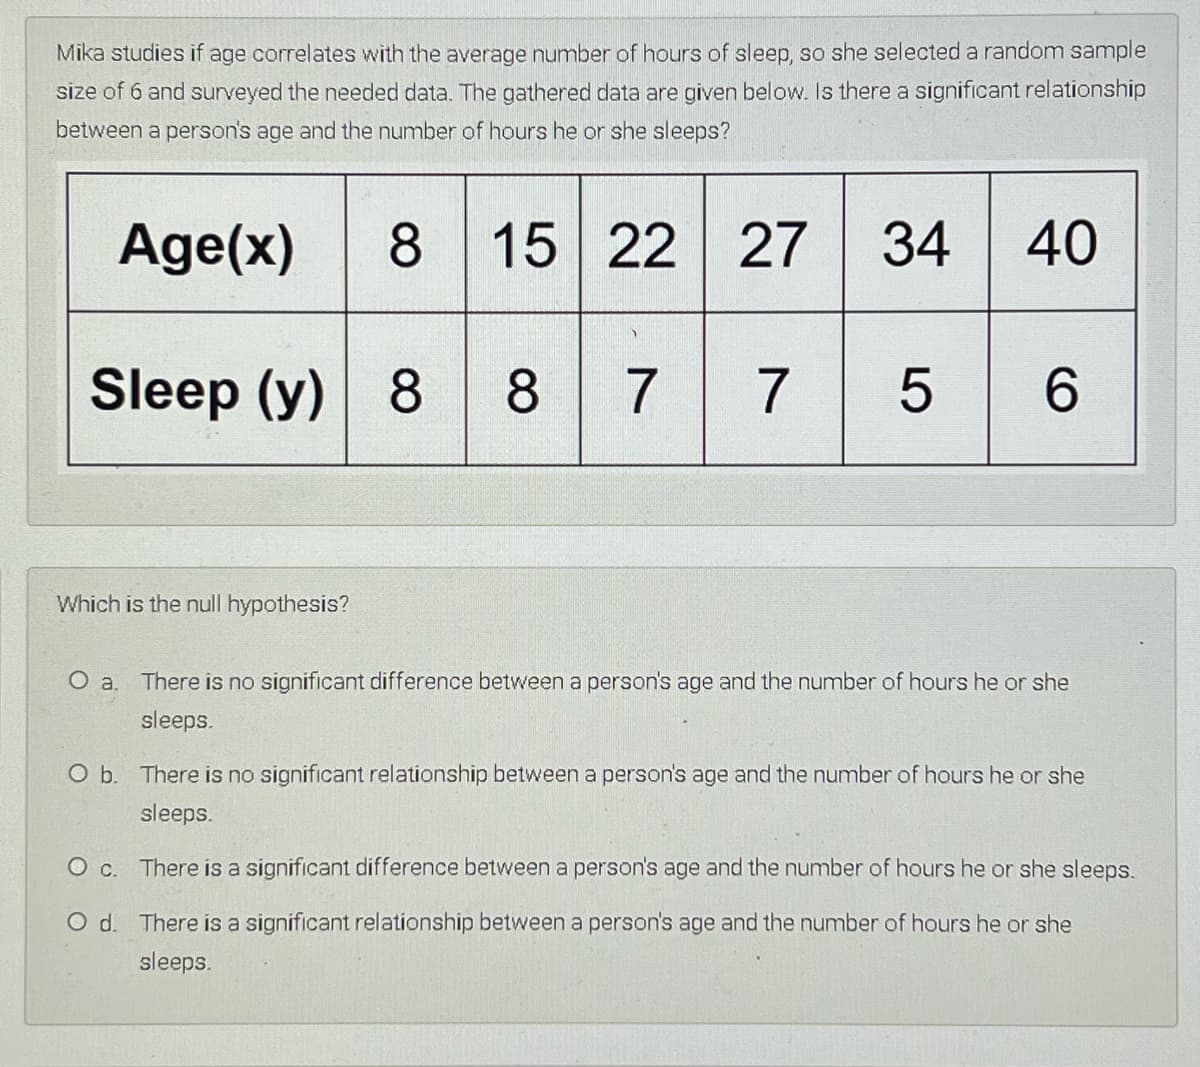 Mika studies if age correlates with the average number of hours of sleep, so she selected a random sample
size of 6 and surveyed the needed data. The gathered data are given below. Is there a significant relationship
between a person's age and the number of hours he or she sleeps?
Age(x)
8 15 22 27
34
40
Sleep (y)
8
7 7
5
6
Which is the null hypothesis?
There is no significant difference between a person's age and the number of hours he or she
sleeps.
O b. There is no significant relationship between a person's age and the number of hours he or she
sleeps.
O c. There is a significant difference between a person's age and the number of hours he or she sleeps.
O d. There is a significant relationship between a person's age and the number of hours he or she
sleeps.
